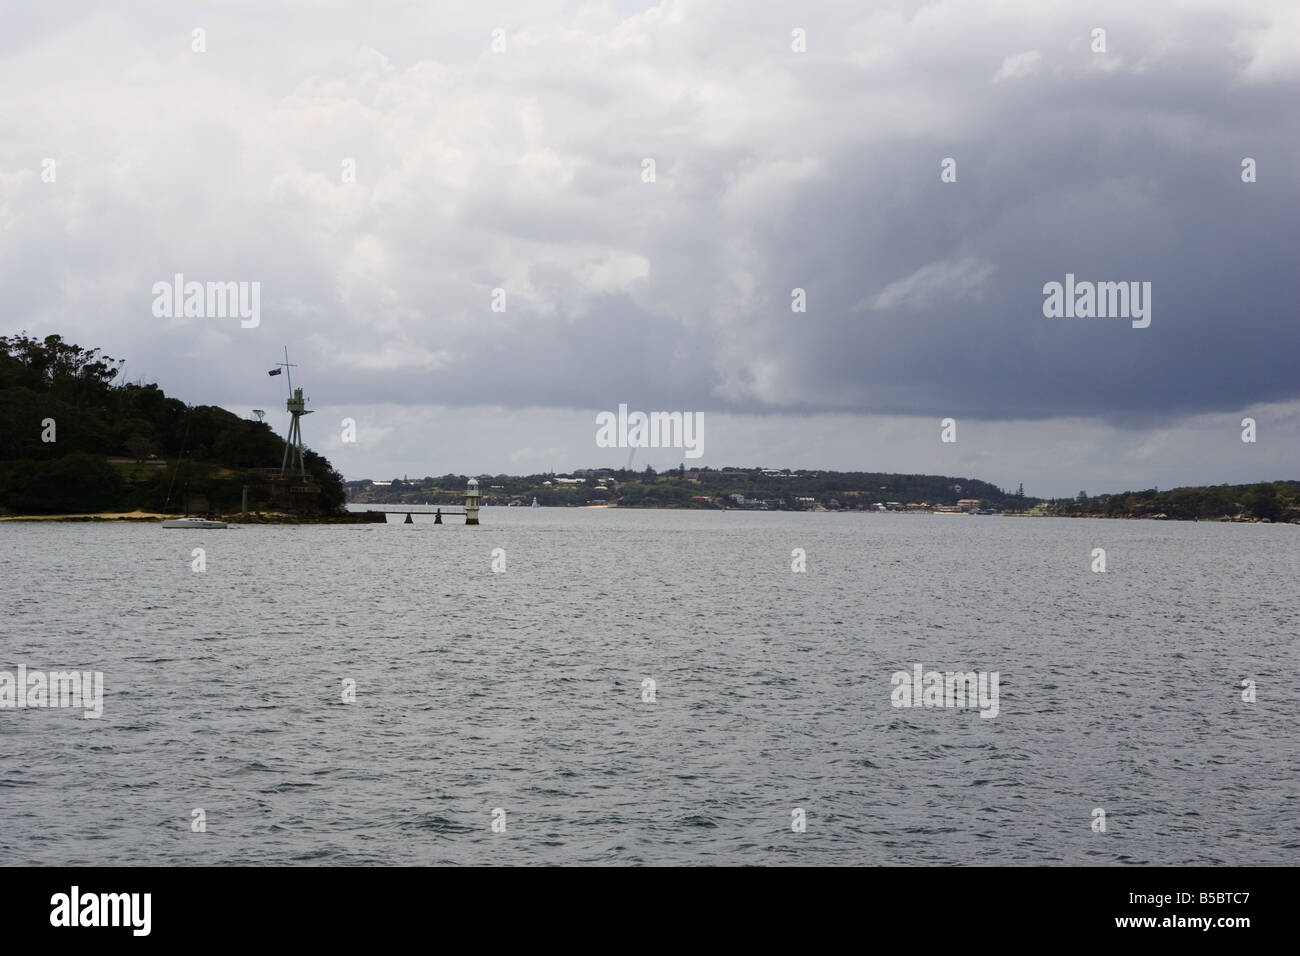 Water Spout/Tornado over Manly Stock Photo